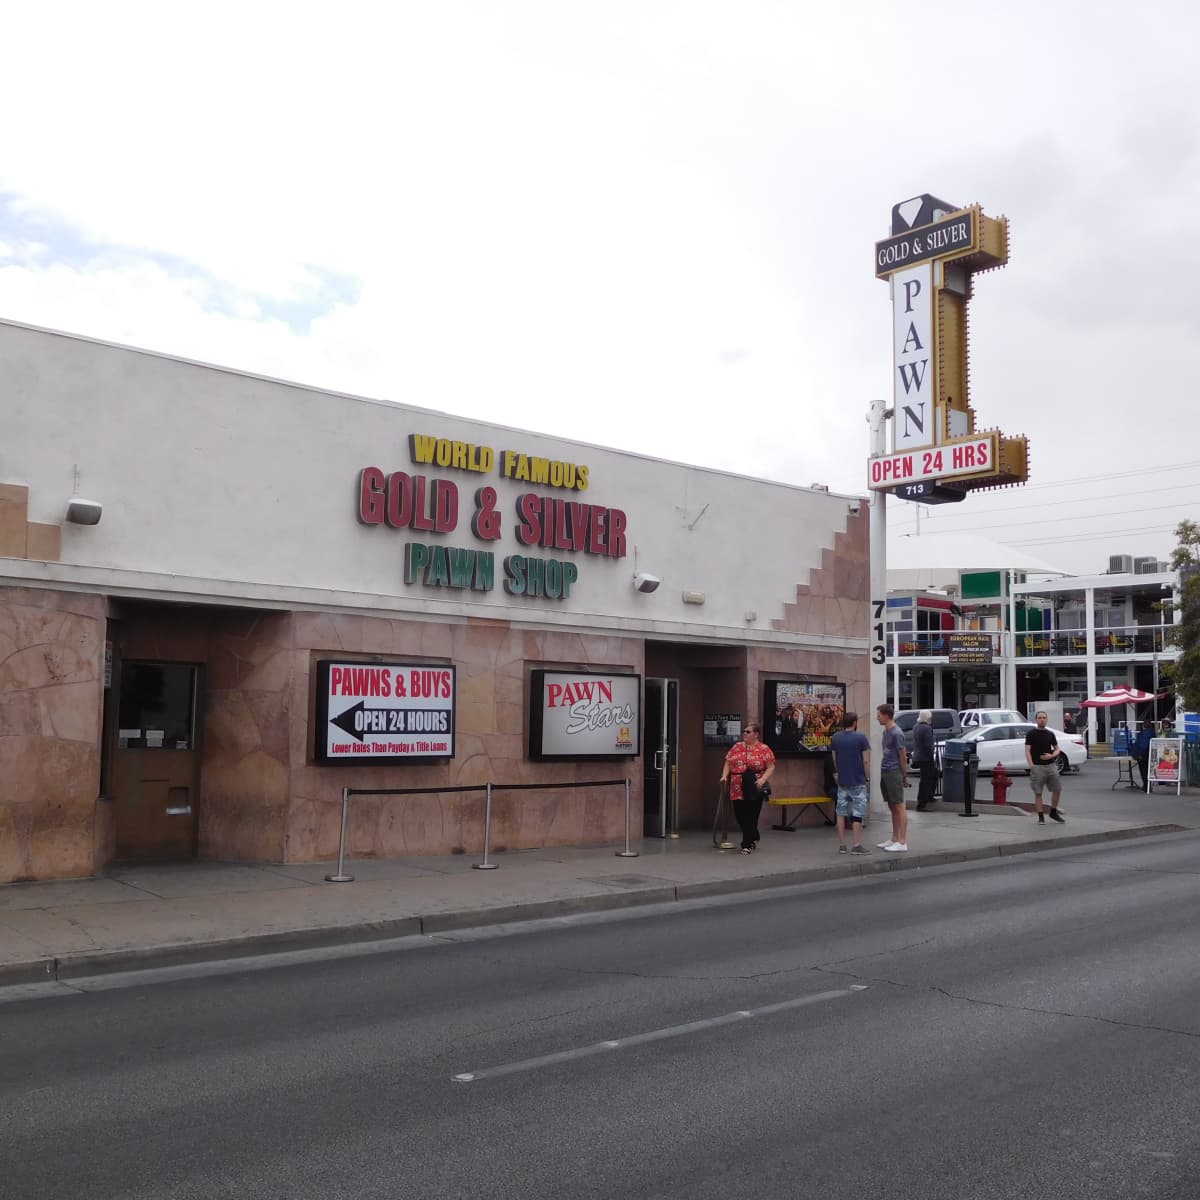 What It's Like to Visit the Gold & Pawn Shop From "Pawn Stars" - WanderWisdom